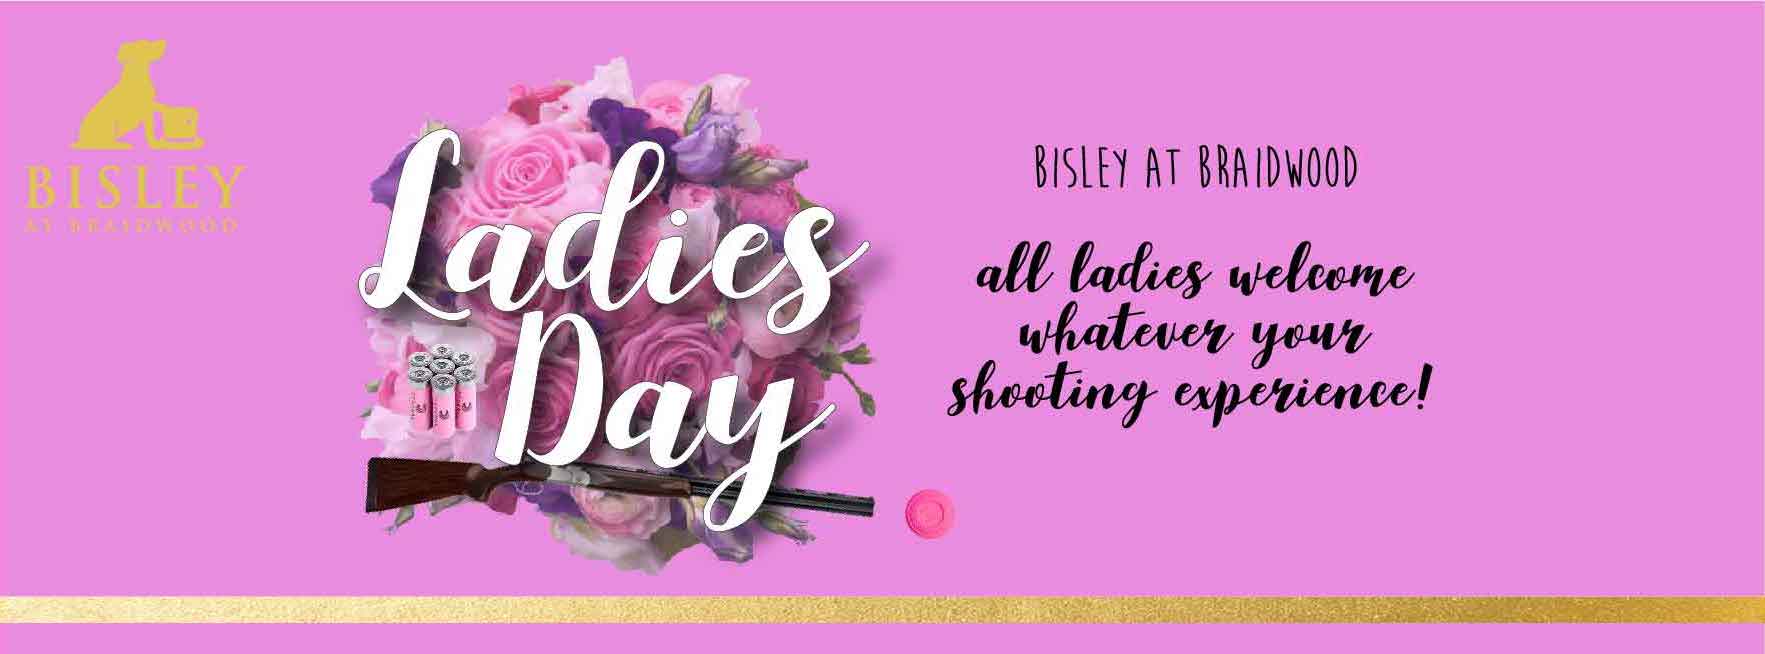 final Ladies day